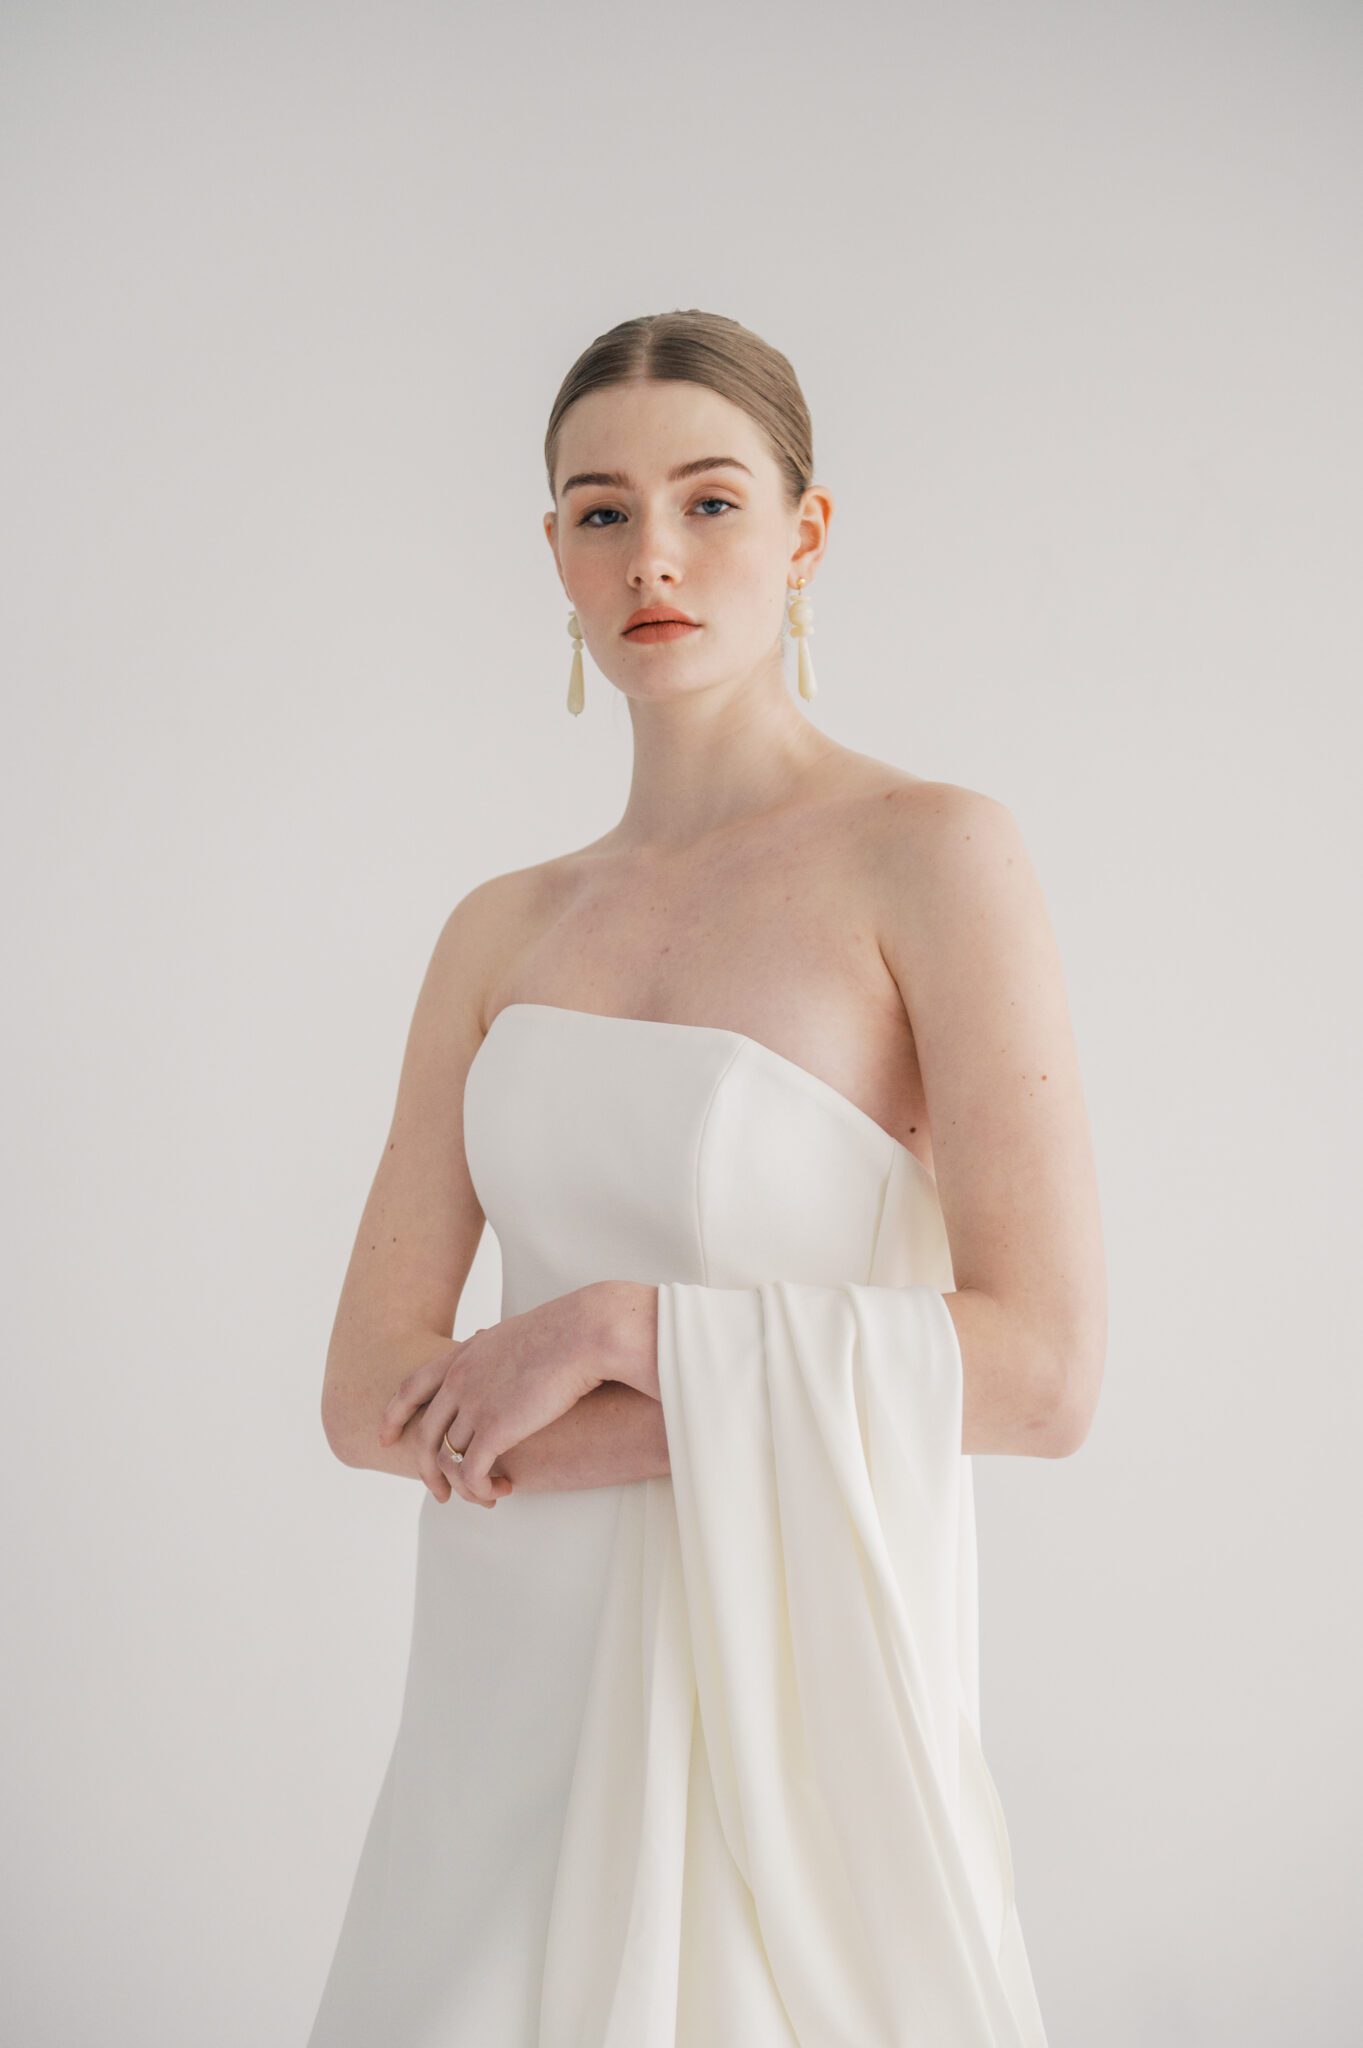 Fashion-forward bridal attire for a chic wedding, sophisticated and minimalist makeup by Amplified Artistry in neutral tones for a modern wedding aesthetic